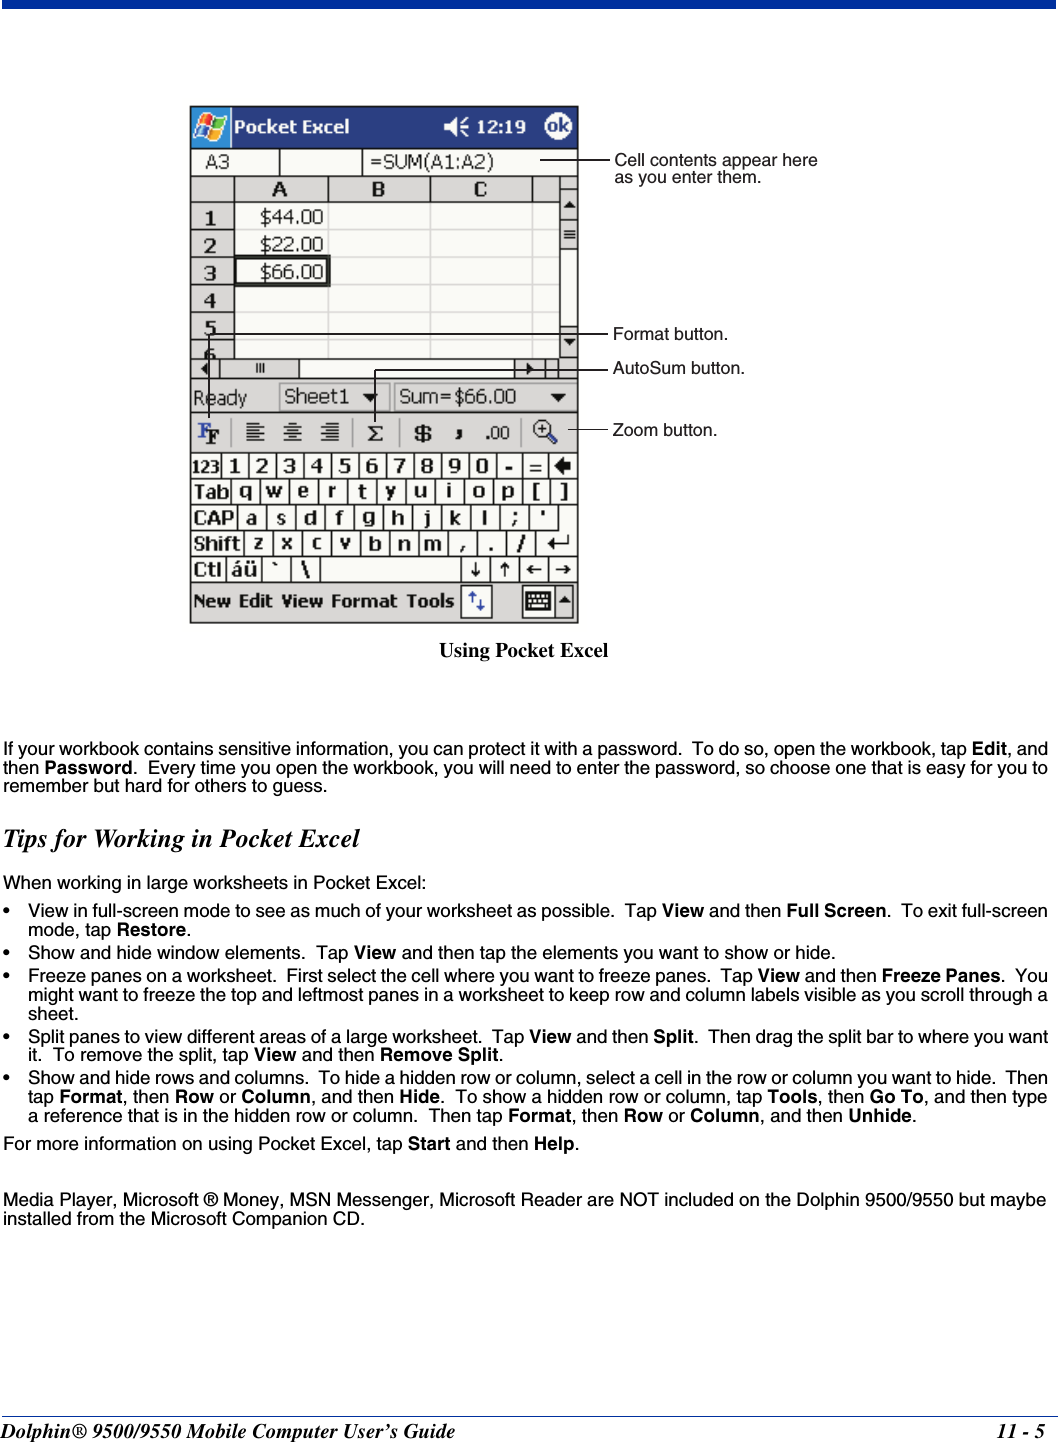 Dolphin® 9500/9550 Mobile Computer User’s Guide 11 - 5If your workbook contains sensitive information, you can protect it with a password.  To do so, open the workbook, tap Edit, and then Password.  Every time you open the workbook, you will need to enter the password, so choose one that is easy for you to remember but hard for others to guess.Tips for Working in Pocket ExcelWhen working in large worksheets in Pocket Excel:• View in full-screen mode to see as much of your worksheet as possible.  Tap View and then Full Screen.  To exit full-screen mode, tap Restore.• Show and hide window elements.  Tap View and then tap the elements you want to show or hide.• Freeze panes on a worksheet.  First select the cell where you want to freeze panes.  Tap View and then Freeze Panes.  You might want to freeze the top and leftmost panes in a worksheet to keep row and column labels visible as you scroll through a sheet.• Split panes to view different areas of a large worksheet.  Tap View and then Split.  Then drag the split bar to where you want it.  To remove the split, tap View and then Remove Split.• Show and hide rows and columns.  To hide a hidden row or column, select a cell in the row or column you want to hide.  Then tap Format, then Row or Column, and then Hide.  To show a hidden row or column, tap Tools, then Go To, and then type a reference that is in the hidden row or column.  Then tap Format, then Row or Column, and then Unhide.For more information on using Pocket Excel, tap Start and then Help.Media Player, Microsoft ® Money, MSN Messenger, Microsoft Reader are NOT included on the Dolphin 9500/9550 but maybe installed from the Microsoft Companion CD.Cell contents appear hereas you enter them.AutoSum button.Format button.Zoom button.Using Pocket Excel